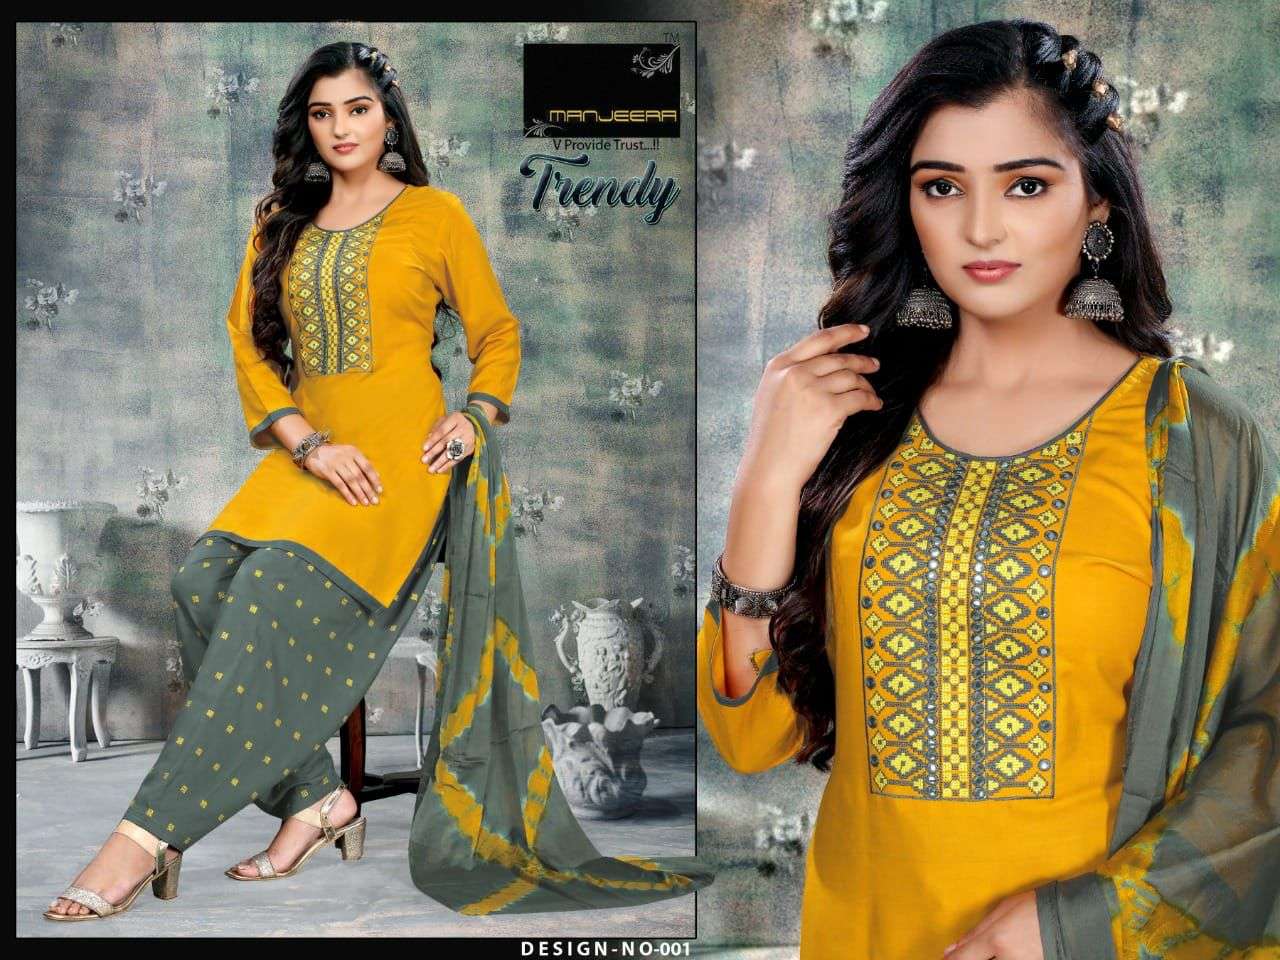 TRENDY BY MANJEERA 001 TO 008 SERIES BEAUTIFUL PATIYALA SUITS COLORFUL STYLISH FANCY CASUAL WEAR & ETHNIC WEAR RAYON WITH WORK DRESSES AT WHOLESALE PRICE